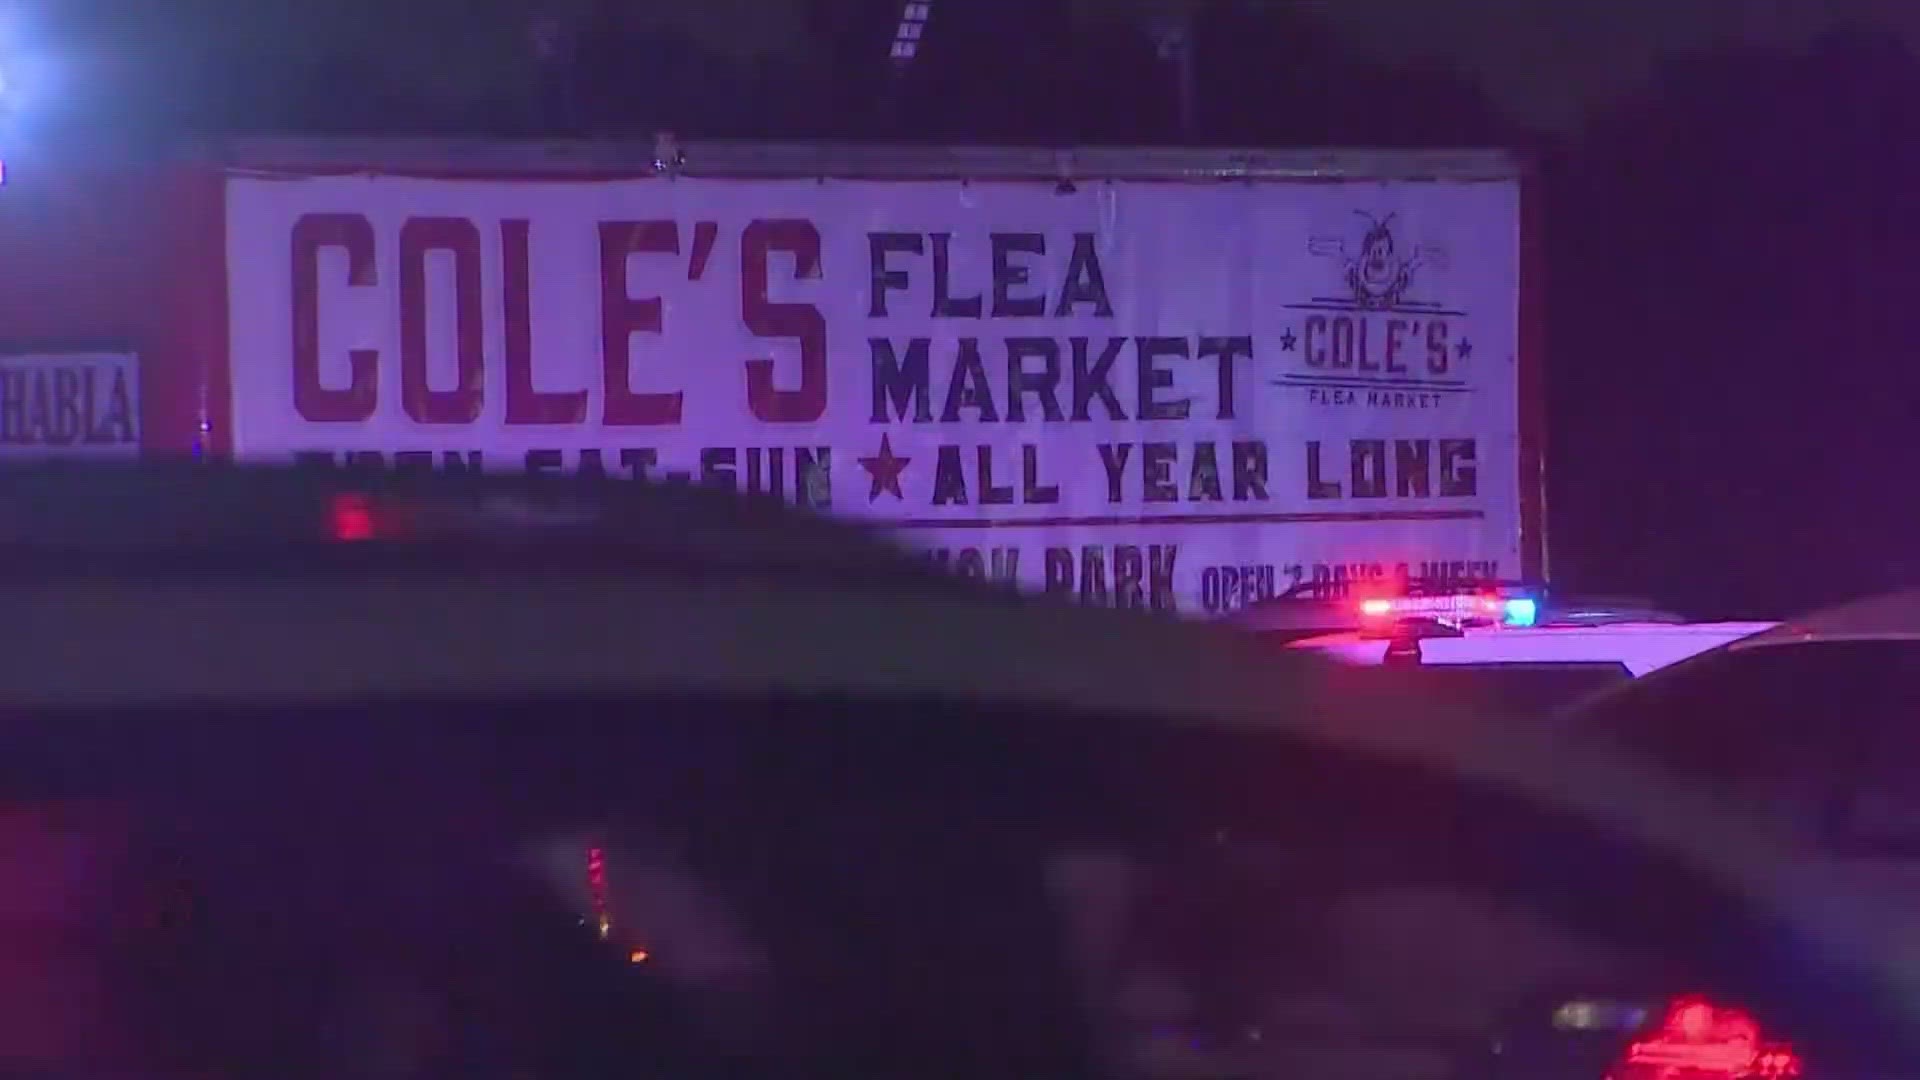 Authorities said five people were shot at the Cole's Antique Village & Flea Market on Sunday. As of 8:40 p.m., the shooter hadn't been taken into custody.